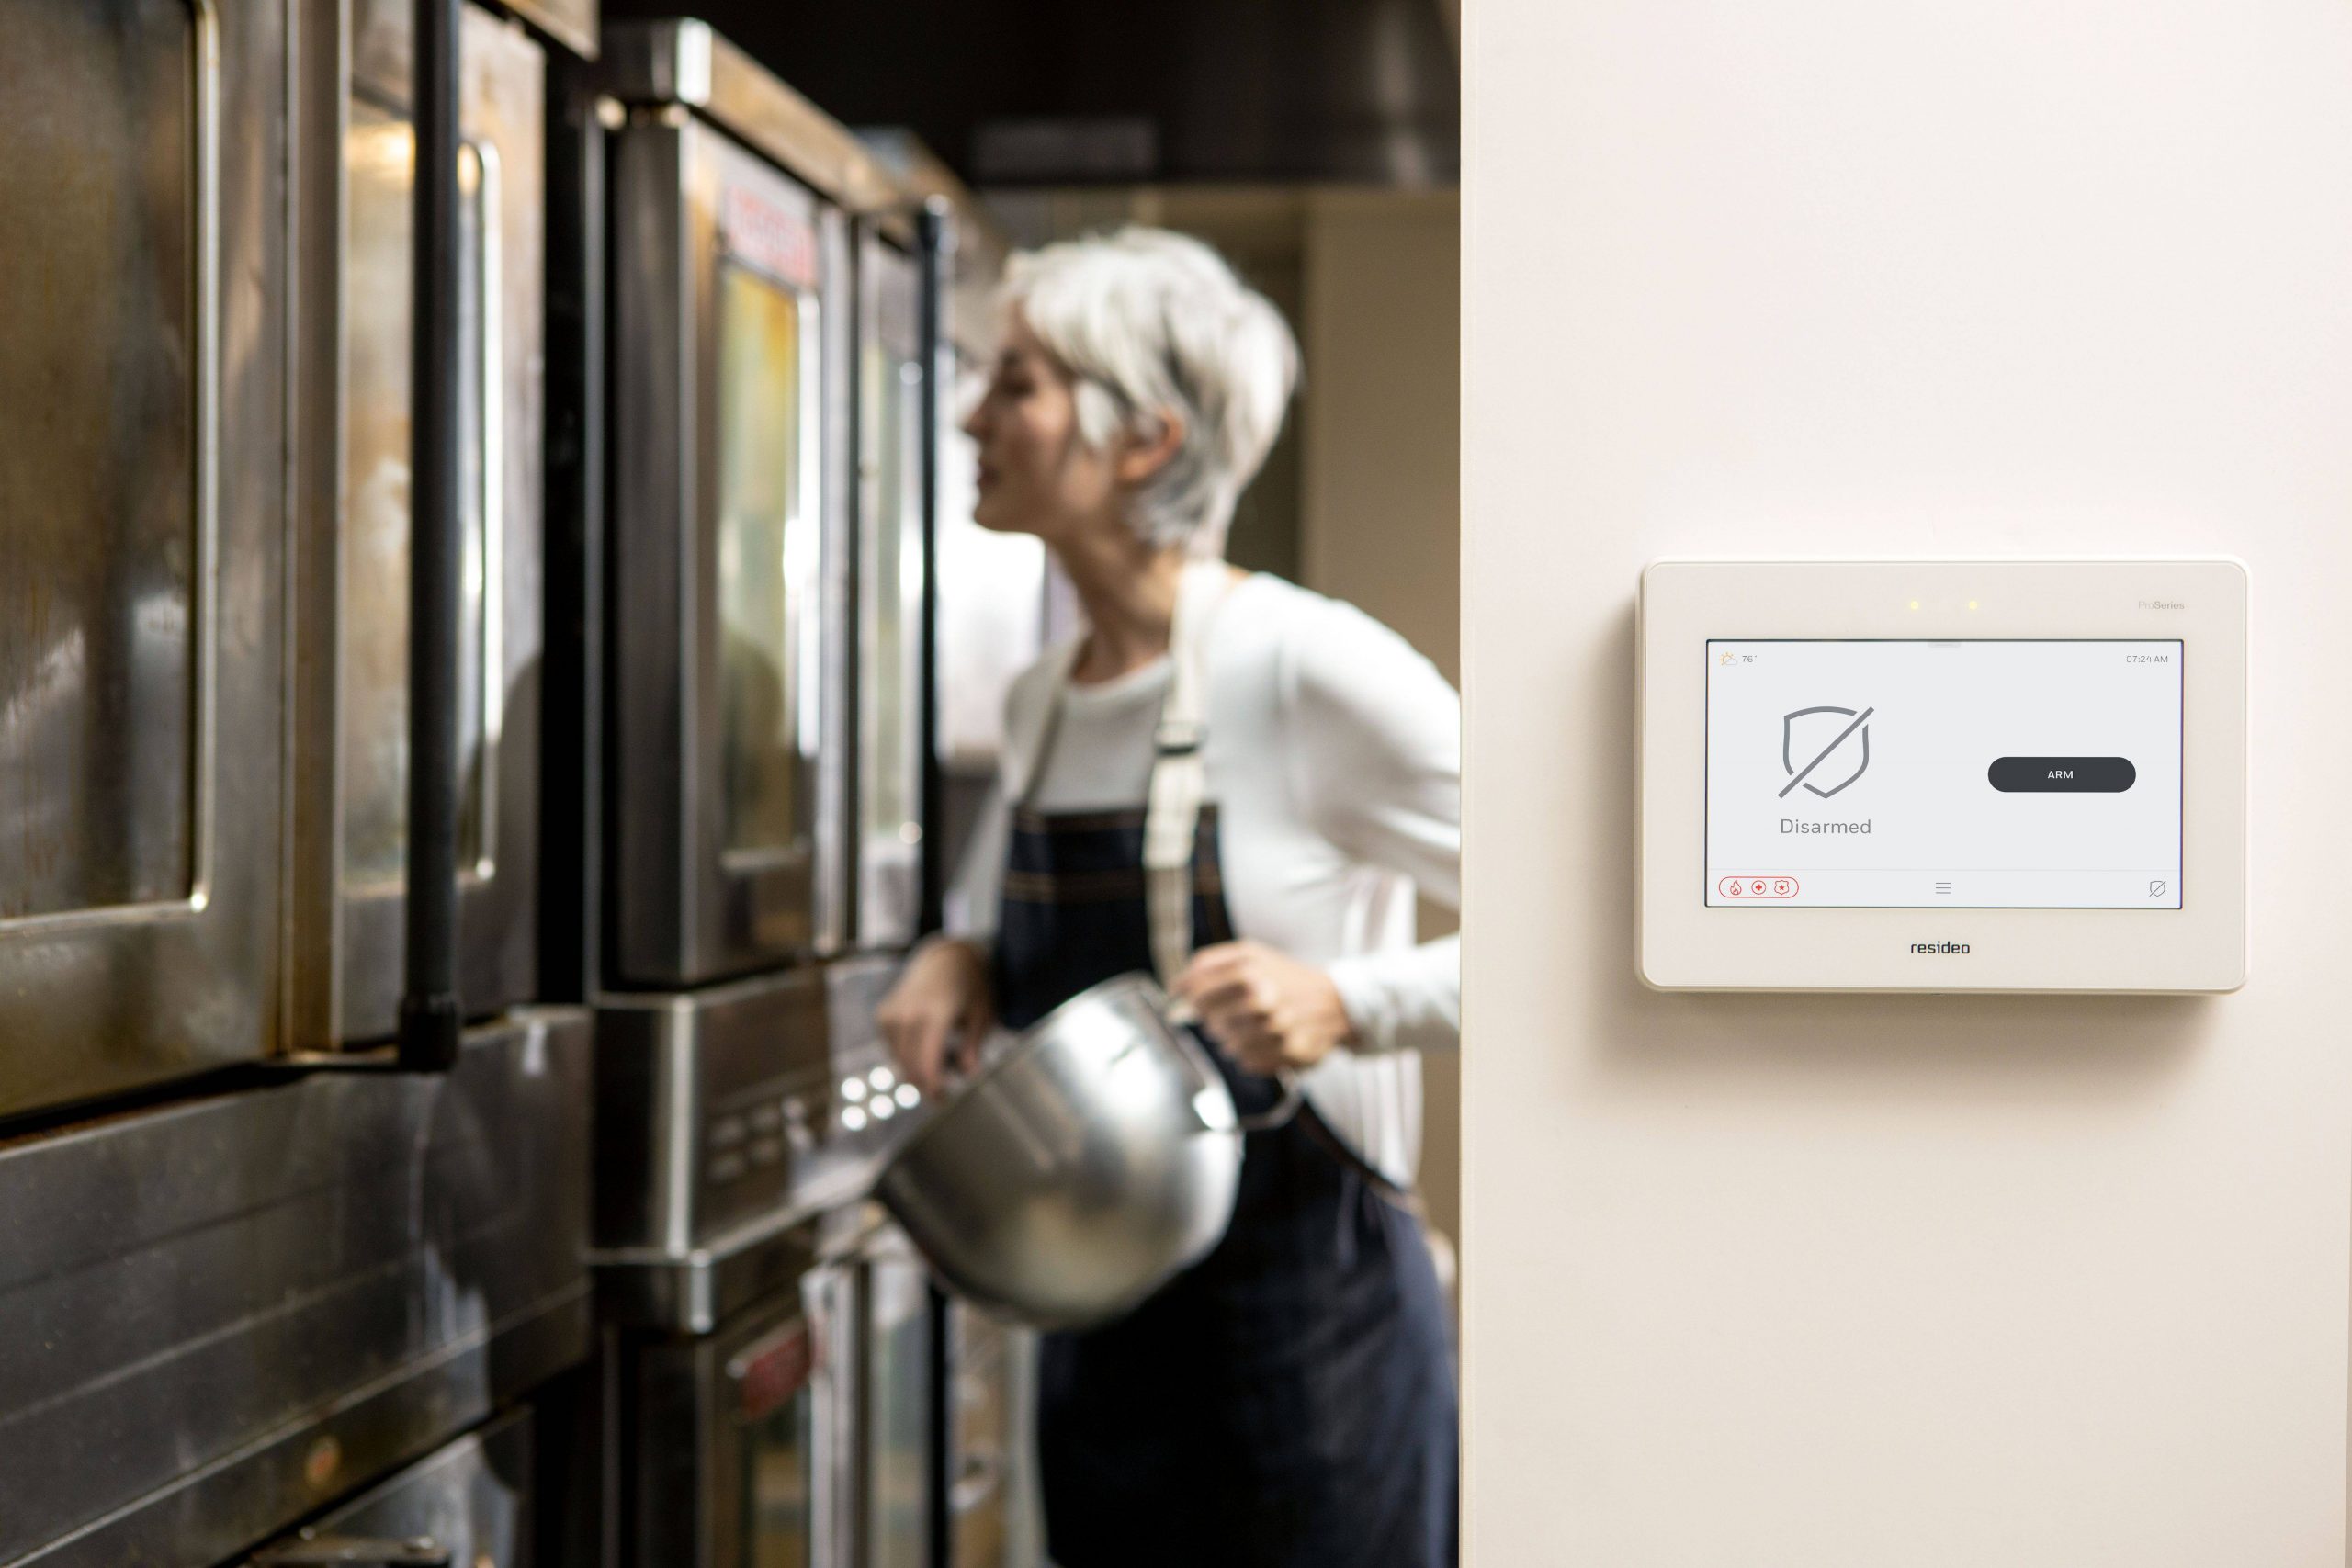 A business security system and commercial alarm keypad in a bakery.